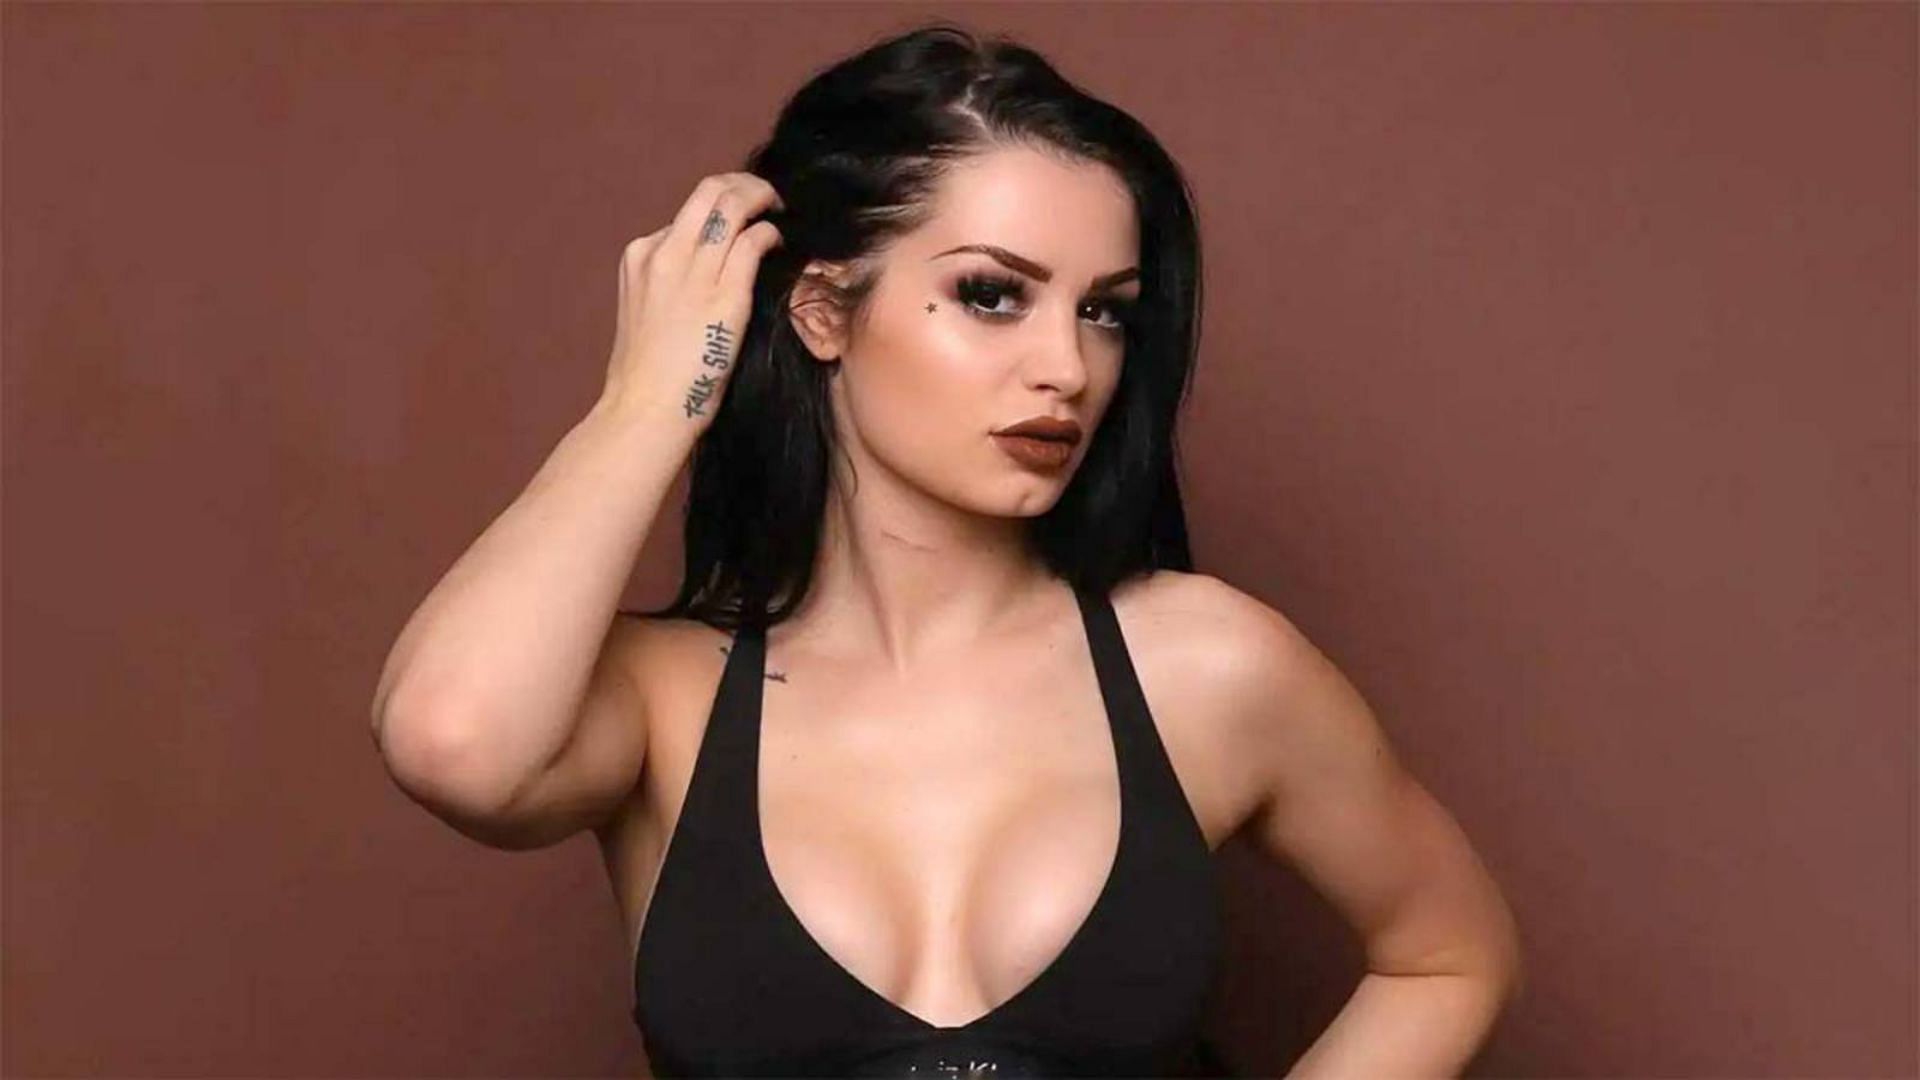 Saraya once introduced fans to her boyfriend on Total Divas.